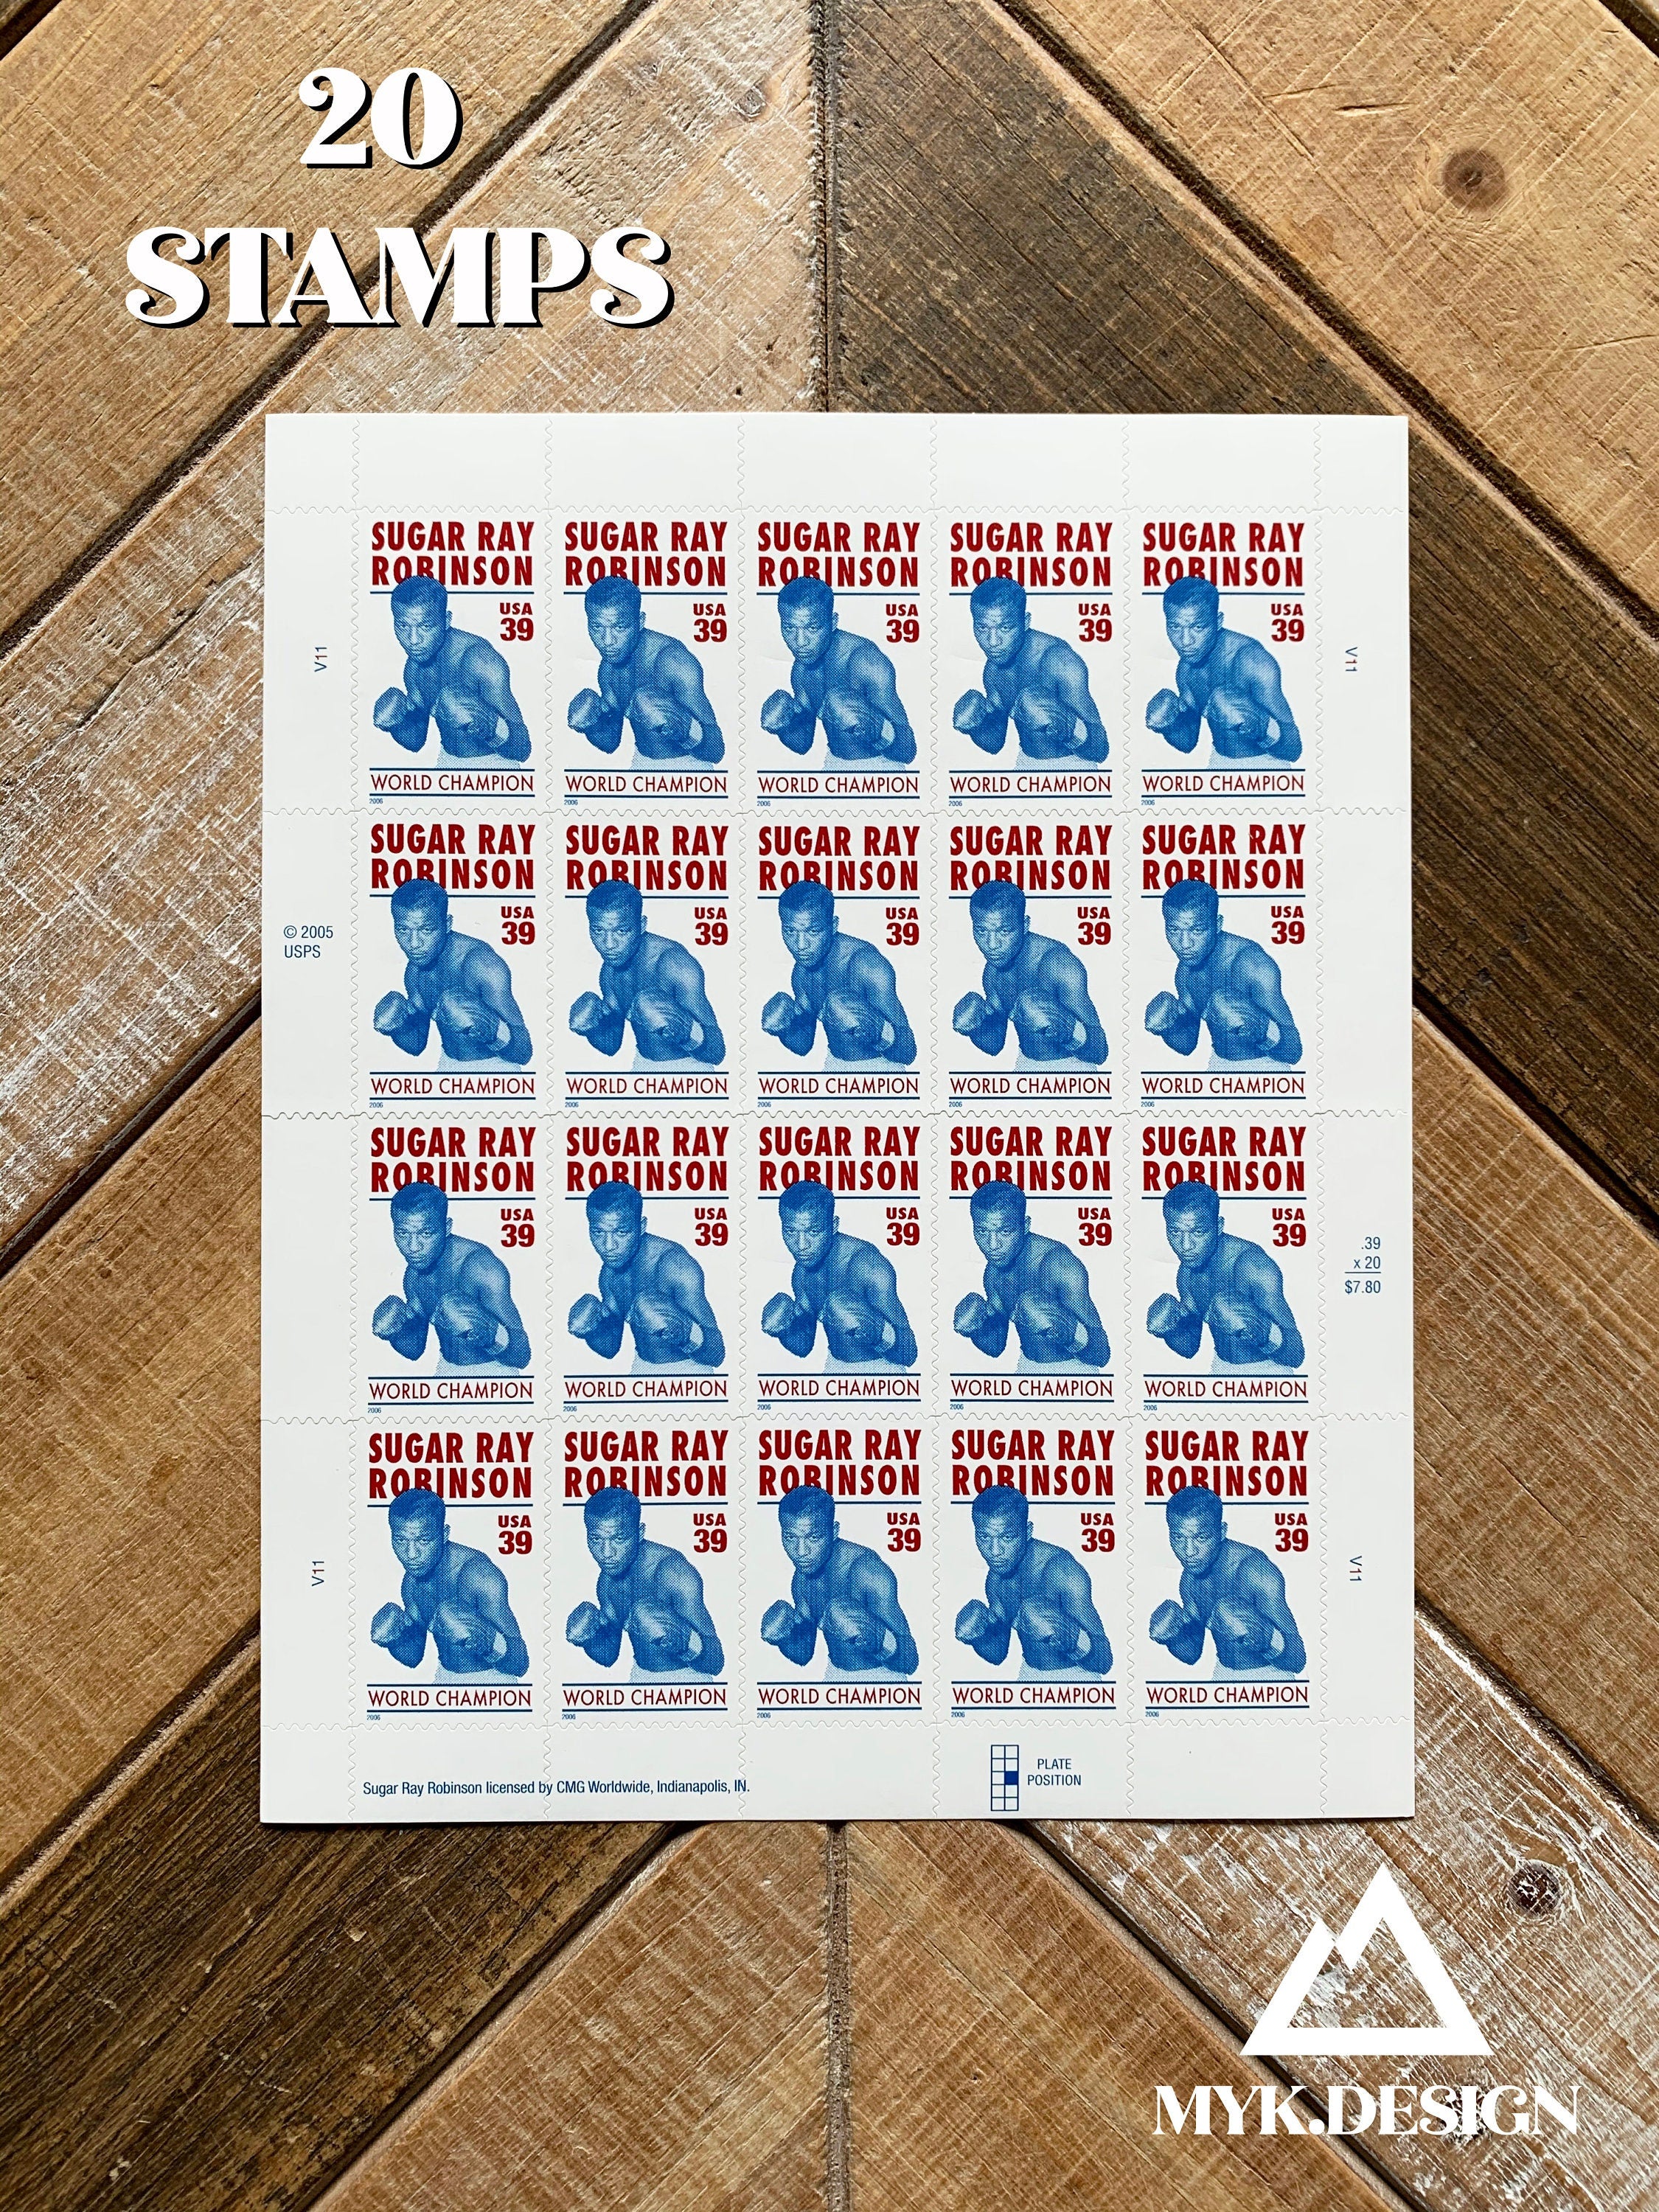 Xtreme Sports Sheet of 10-20 U.S. Stamps